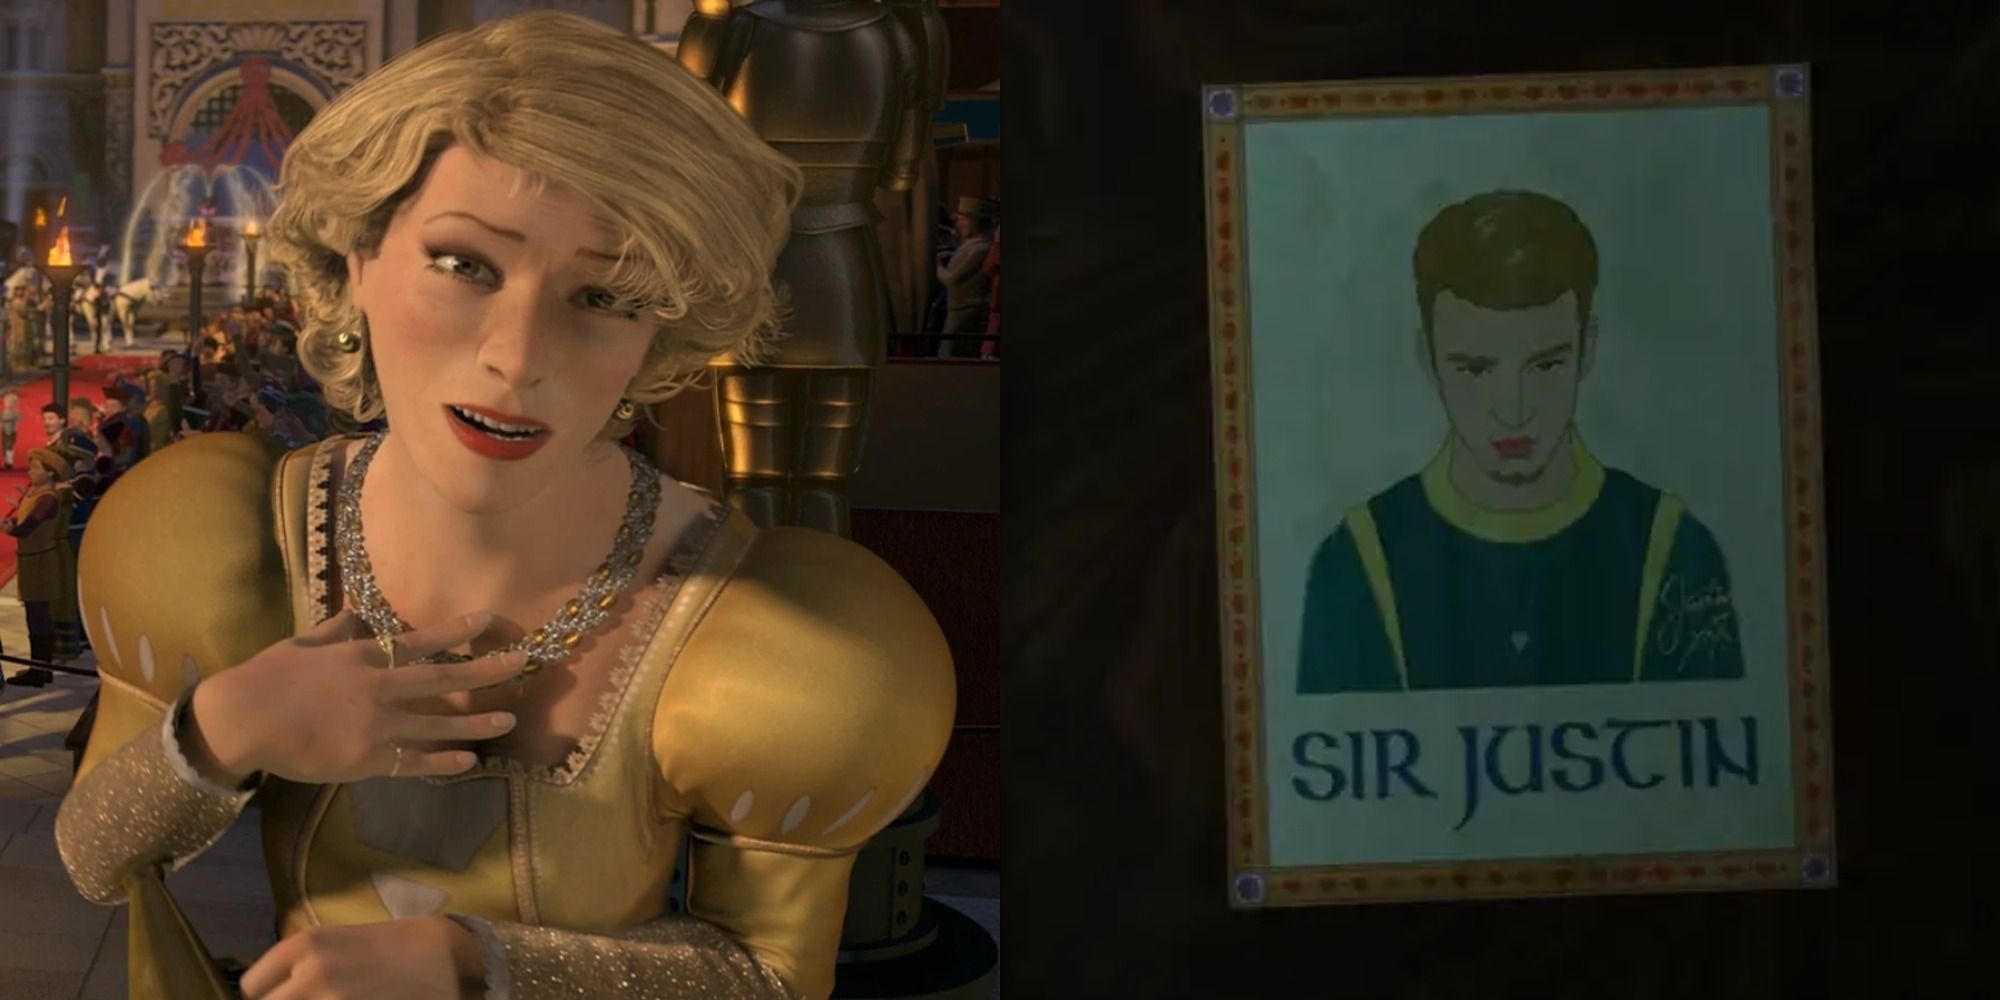 Split image showing Joan Rivers and a Sir Justin poster in Shrek 2.